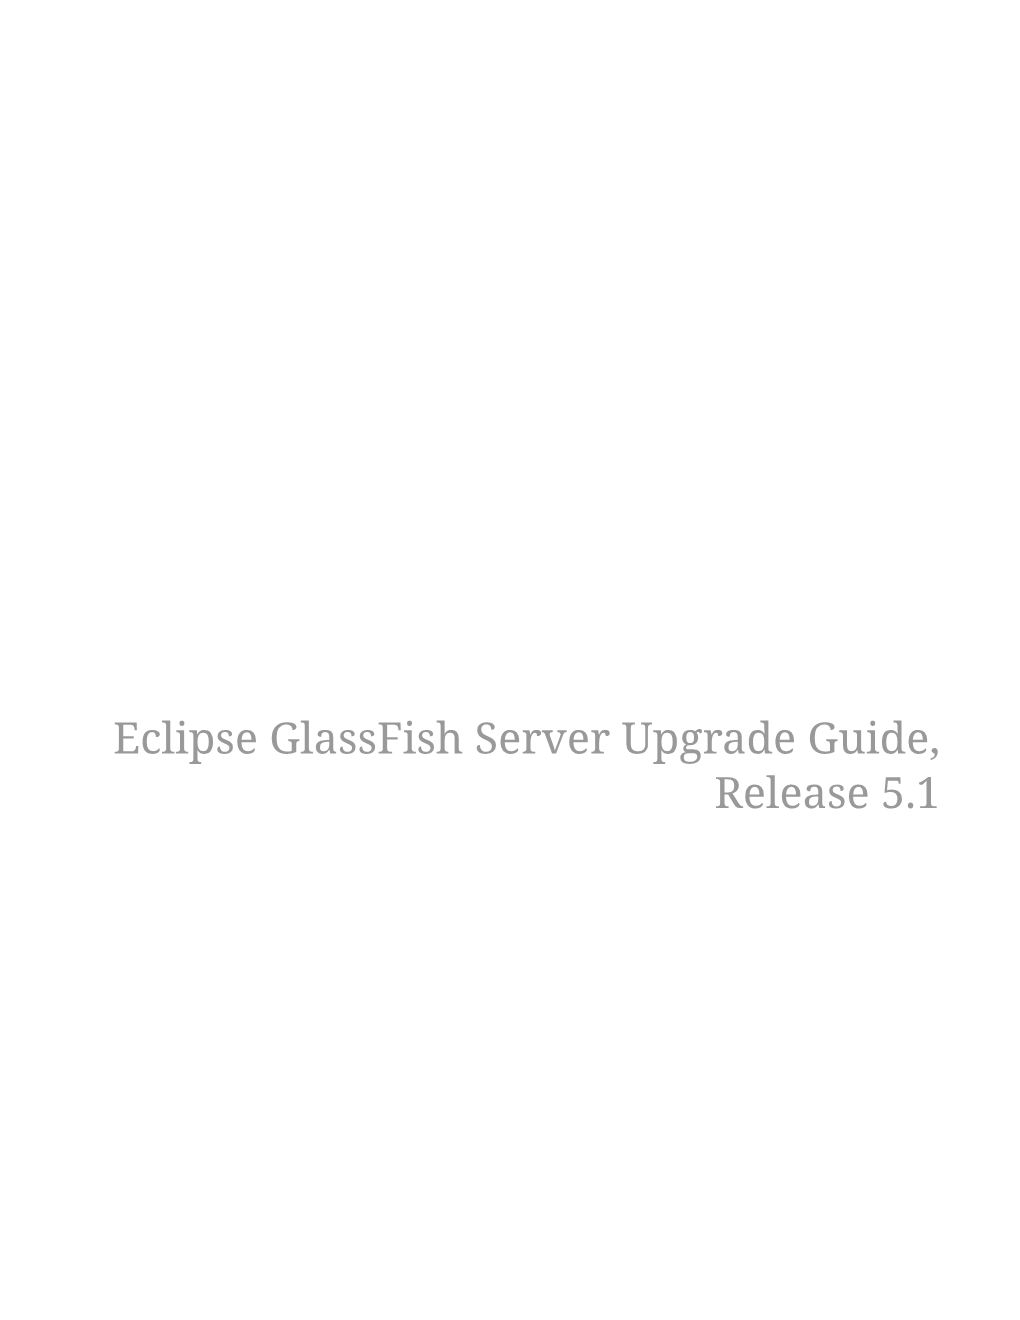 Eclipse Glassfish Server Upgrade Guide, Release 5.1 Table of Contents